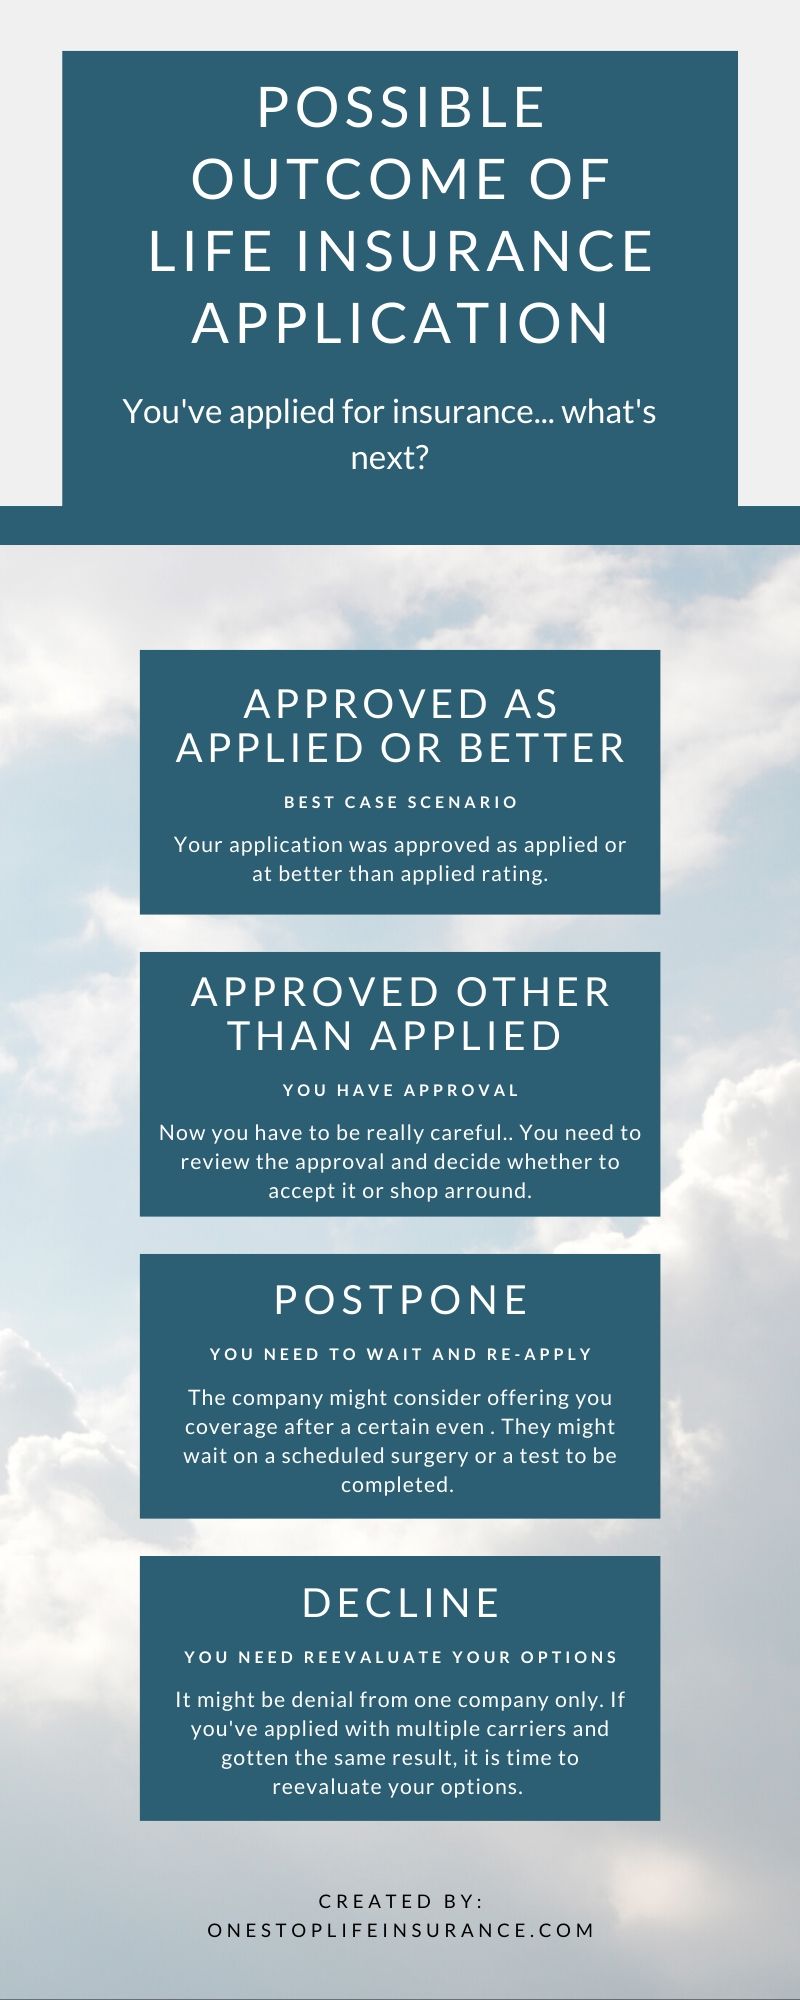 Infographic on Possible outcome of life insurance application